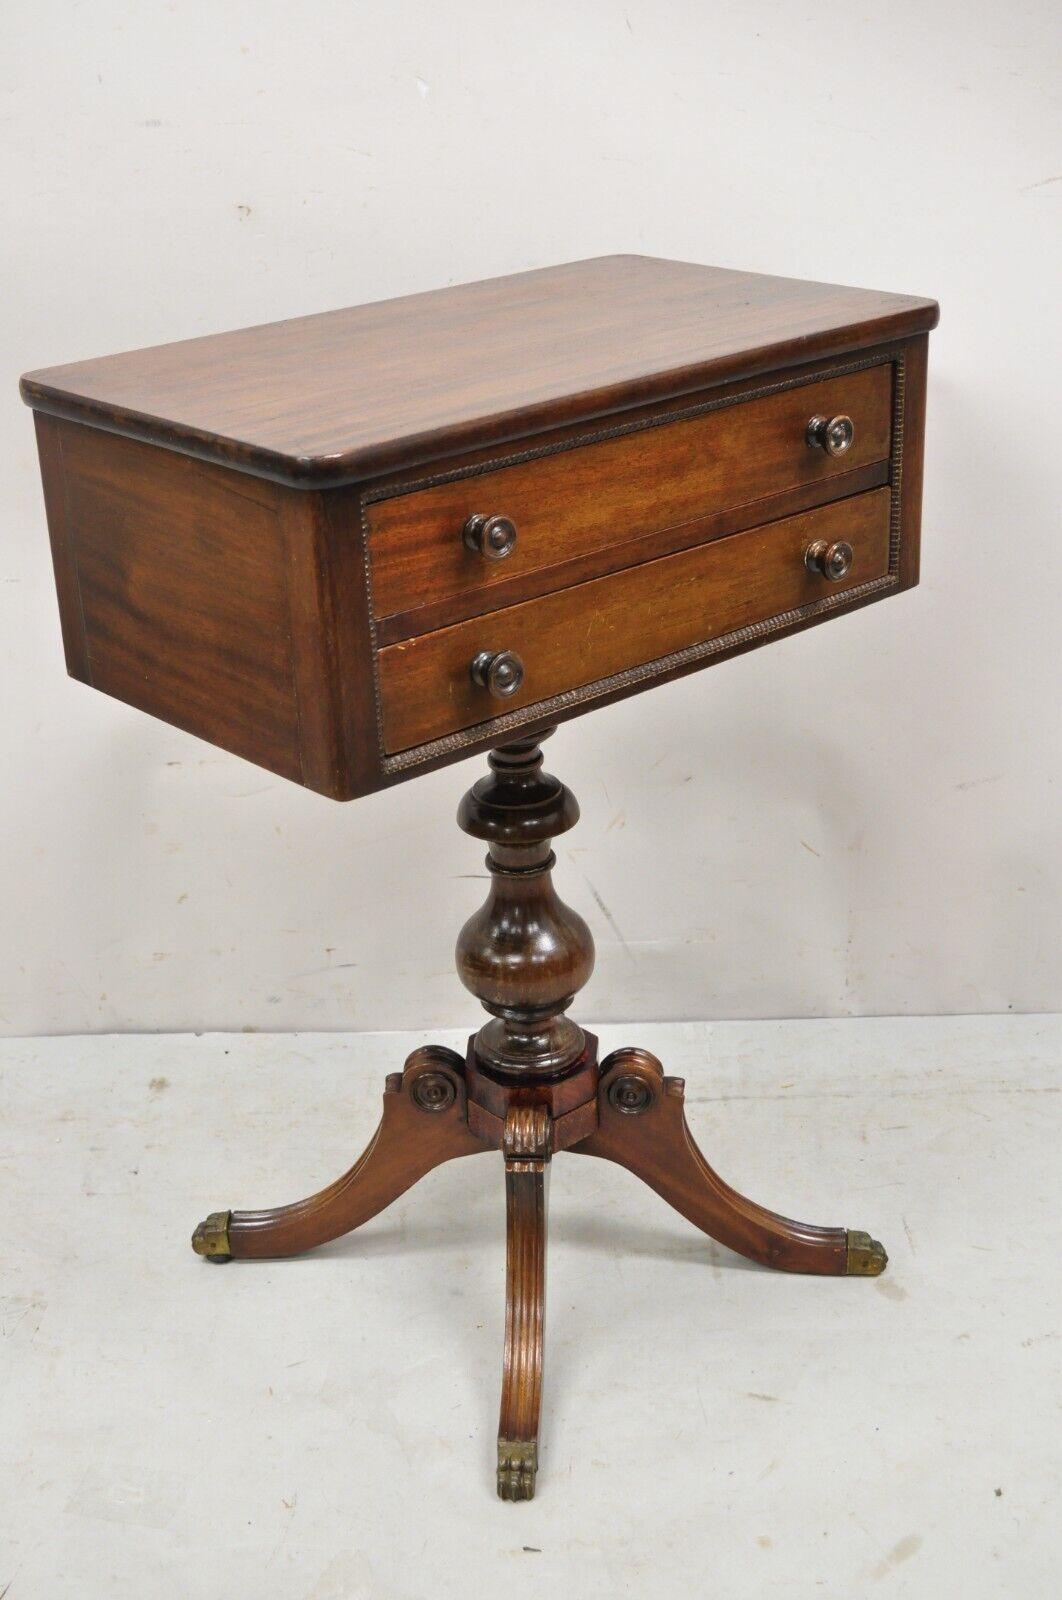 Vintage Mahogany Federal Style Pedestal Base 2 Drawer Duncan Phyfe Side End Table. Item features brass paw feet, pedestal base, beautiful wood grain, 2 drawers, very nice vintage item. Circa Early 20th Century. Measurements: 27